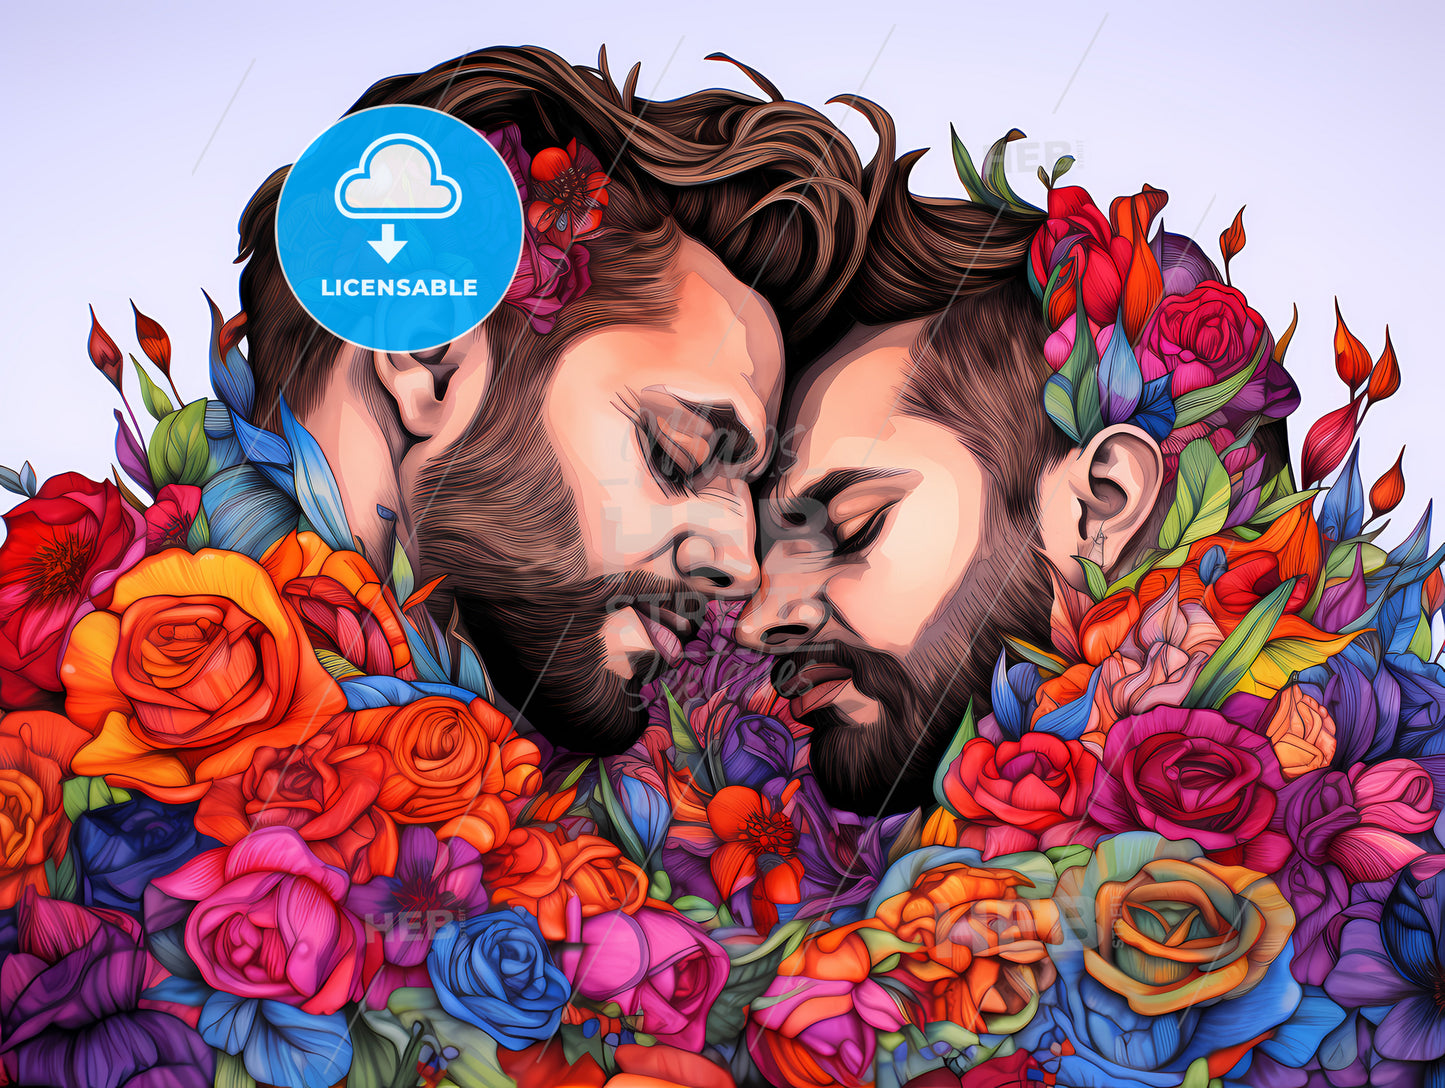 Dessin Pour Coloriage Couple Gay, A Couple Of Men With Flowers Around Their Heads